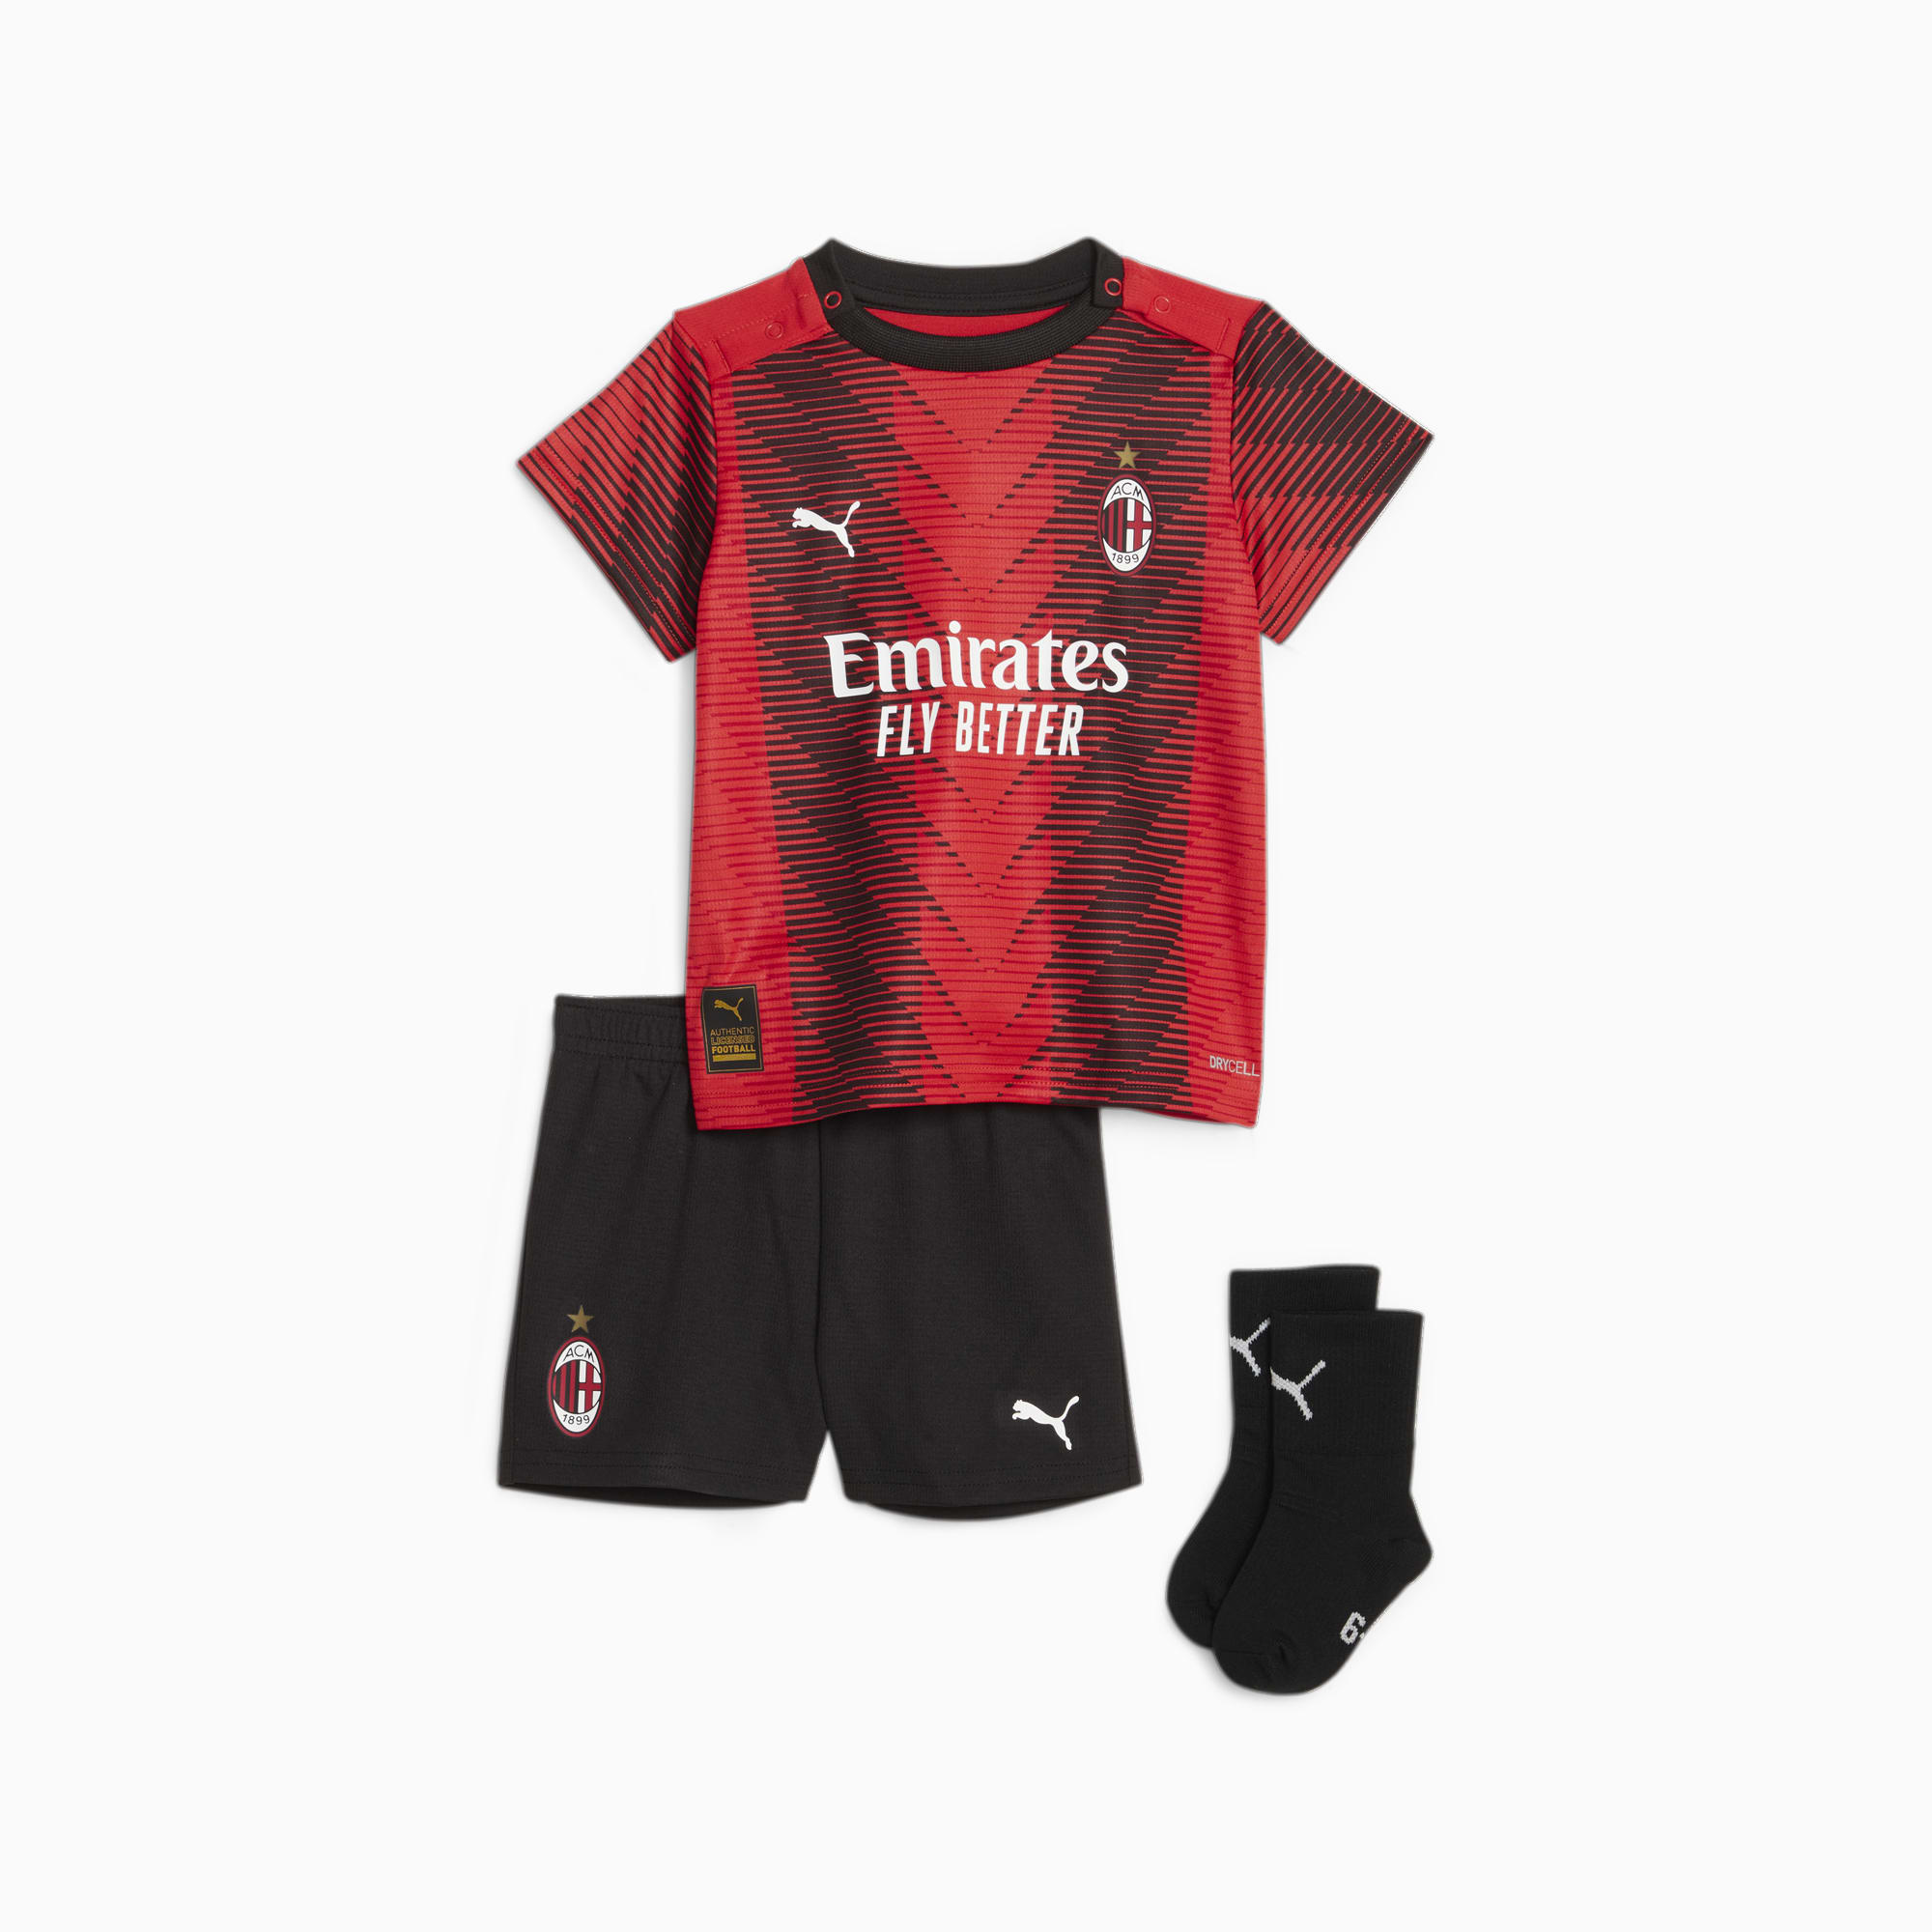 PUMA A.C. Milan 23/24 Home Baby Kit, For All Time Red/Black